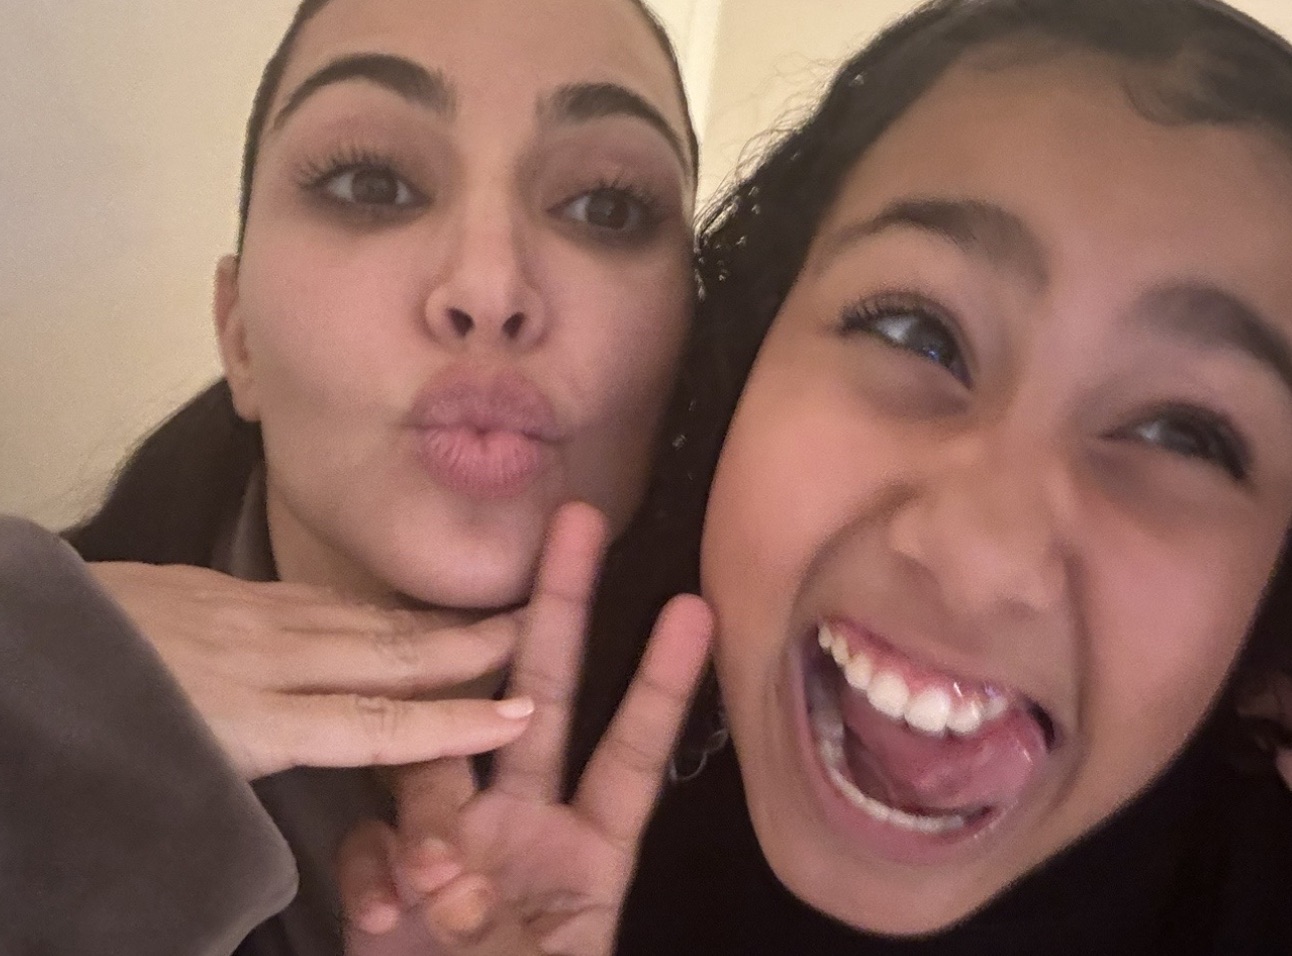 A fan joked that one day North will 'expose all the family tea' when she gets older